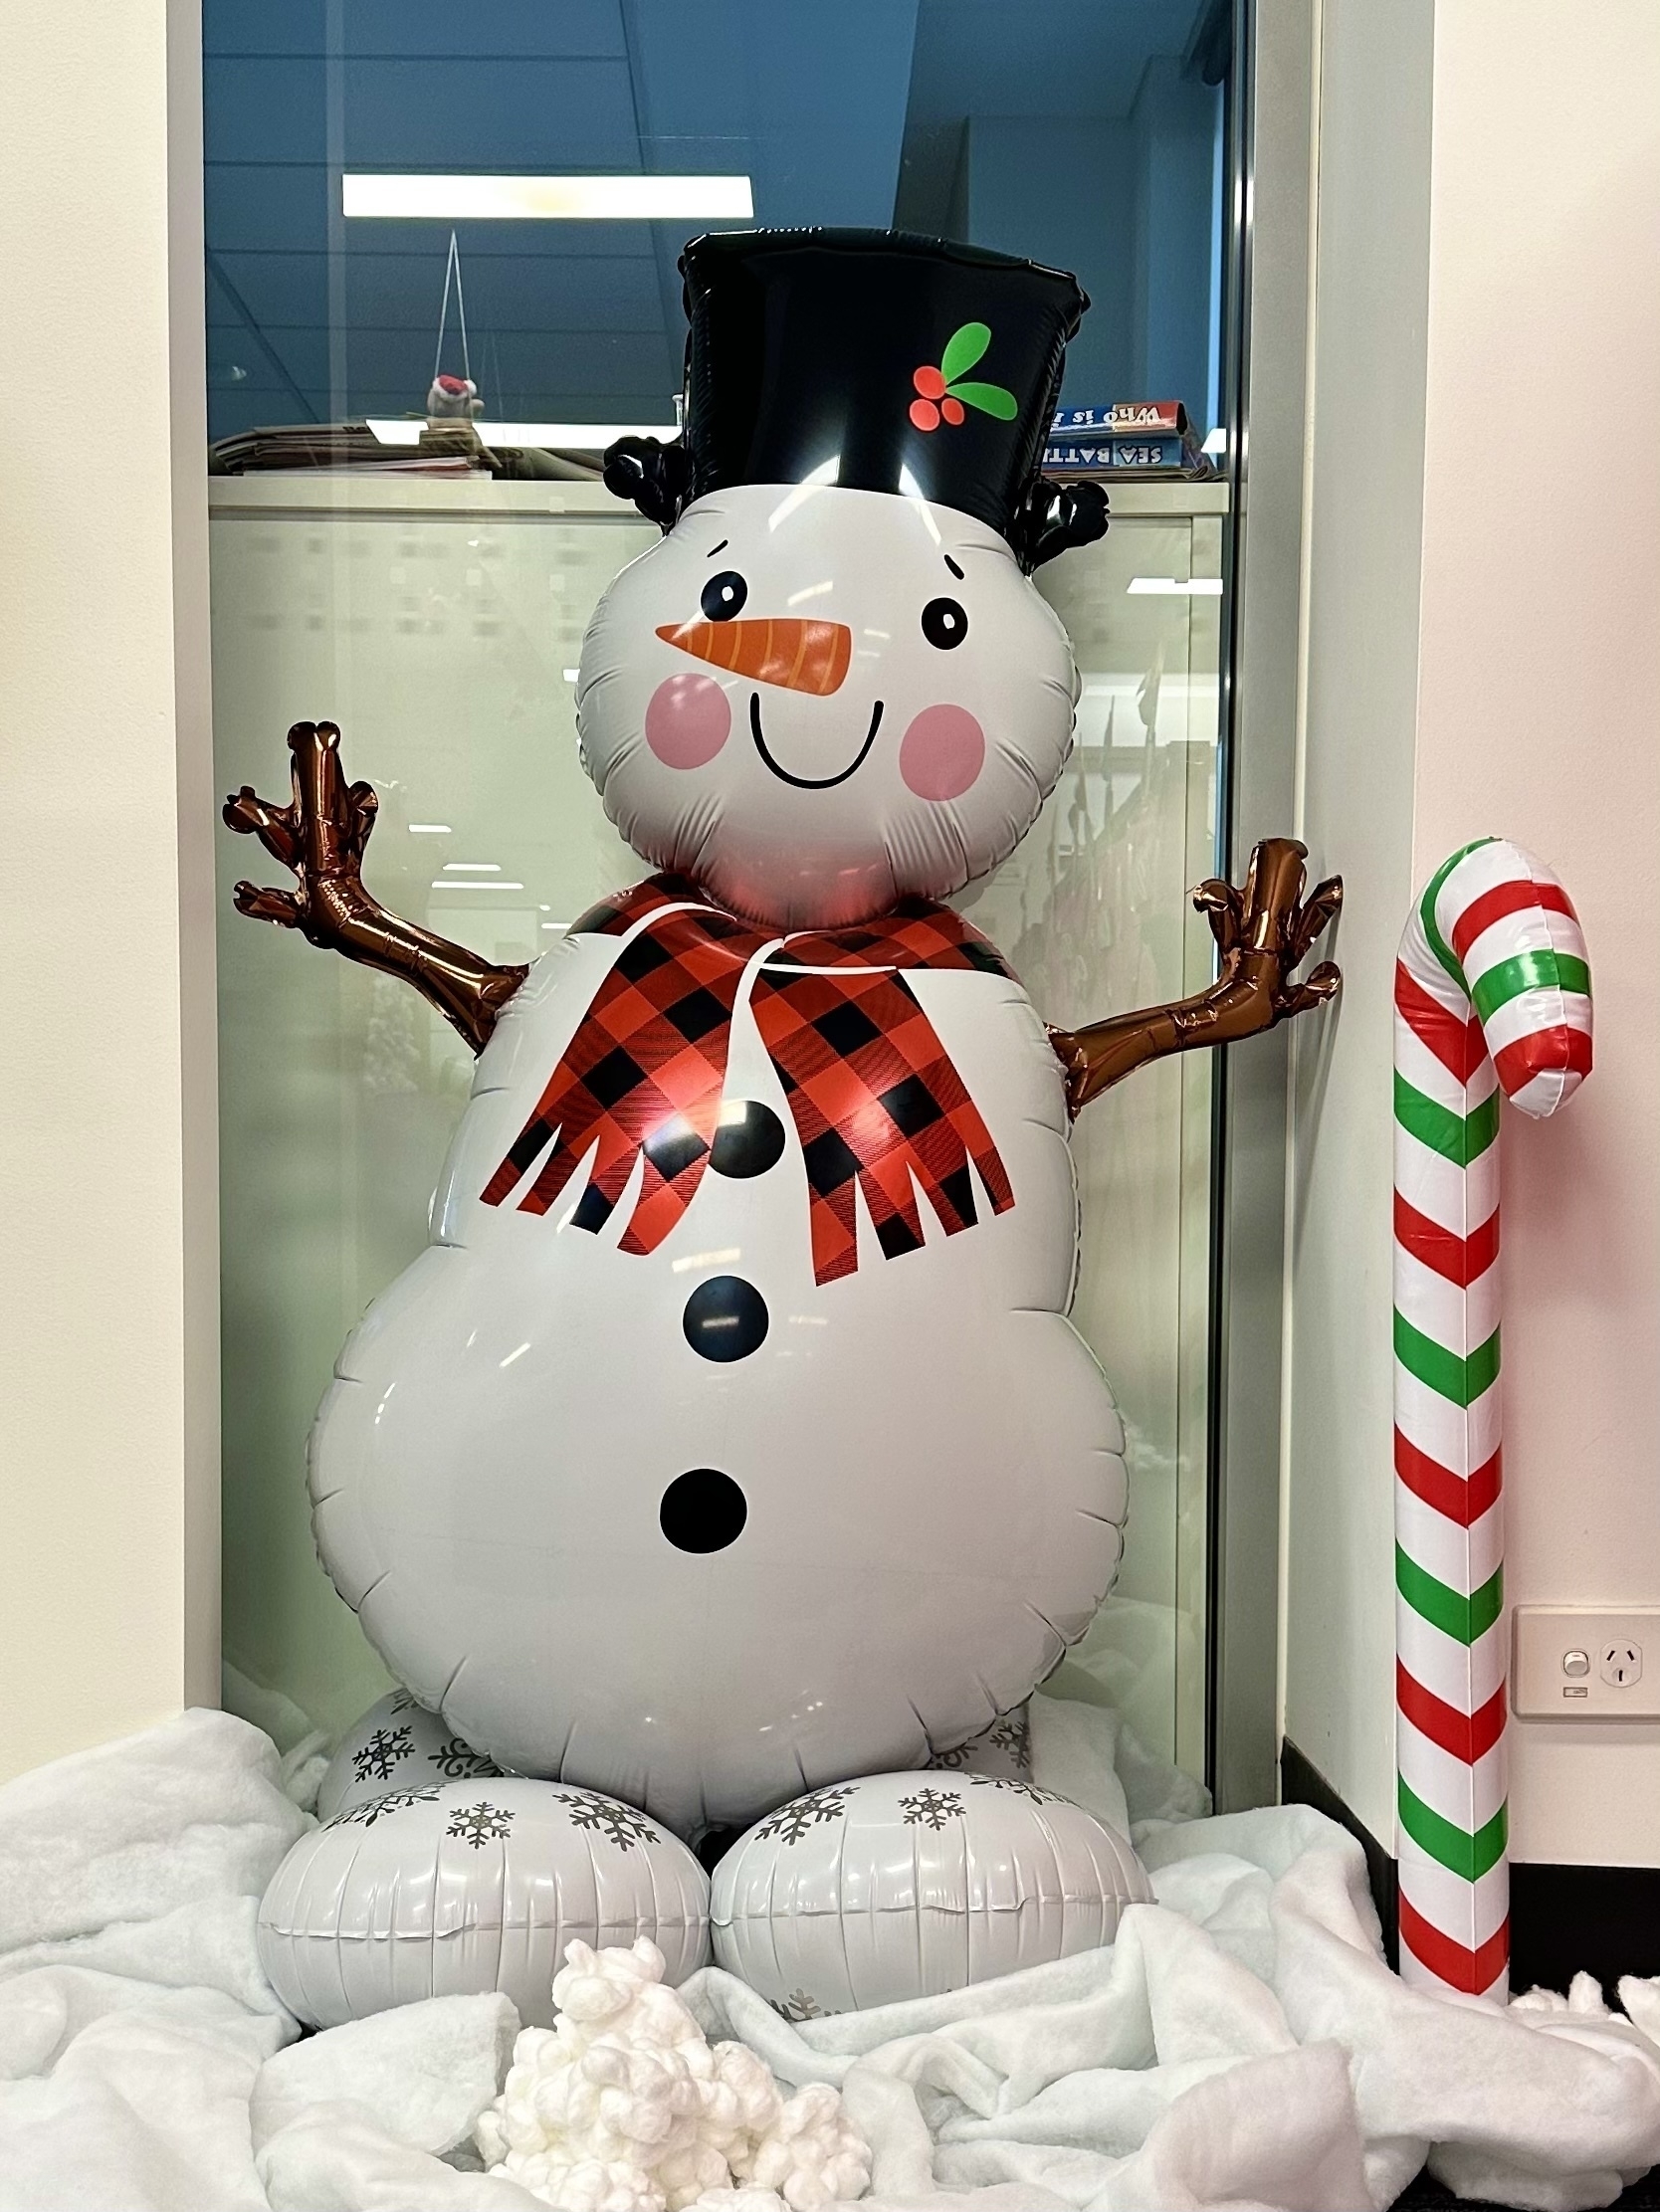 An inflatable snowman about 1 metre high standing against a glass panel. The snowman has a black top hat, red scarf, carrot for a nose and branches for arms. An inflatable red, white and green candy cane is standing nearby.